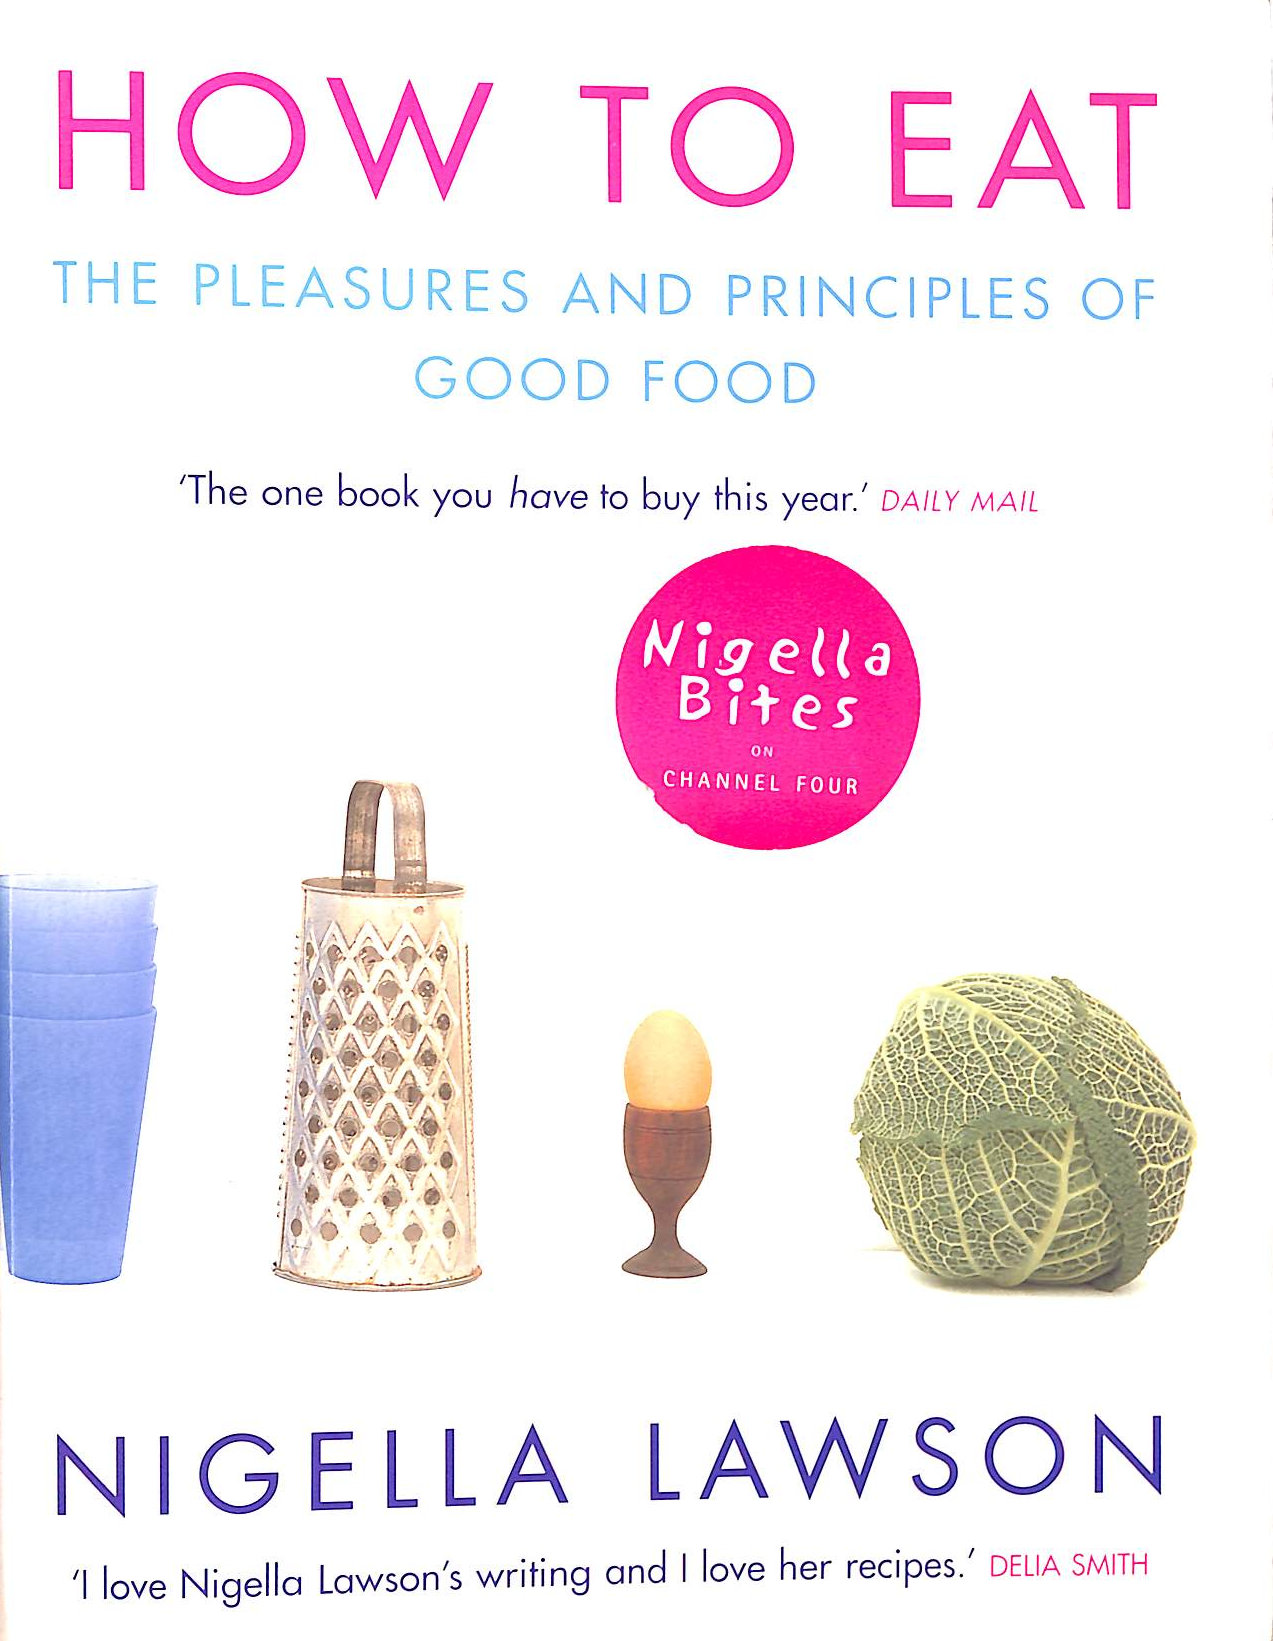 LAWSON, NIGELLA - How to Eat: The Pleasures and Principles of Good Food